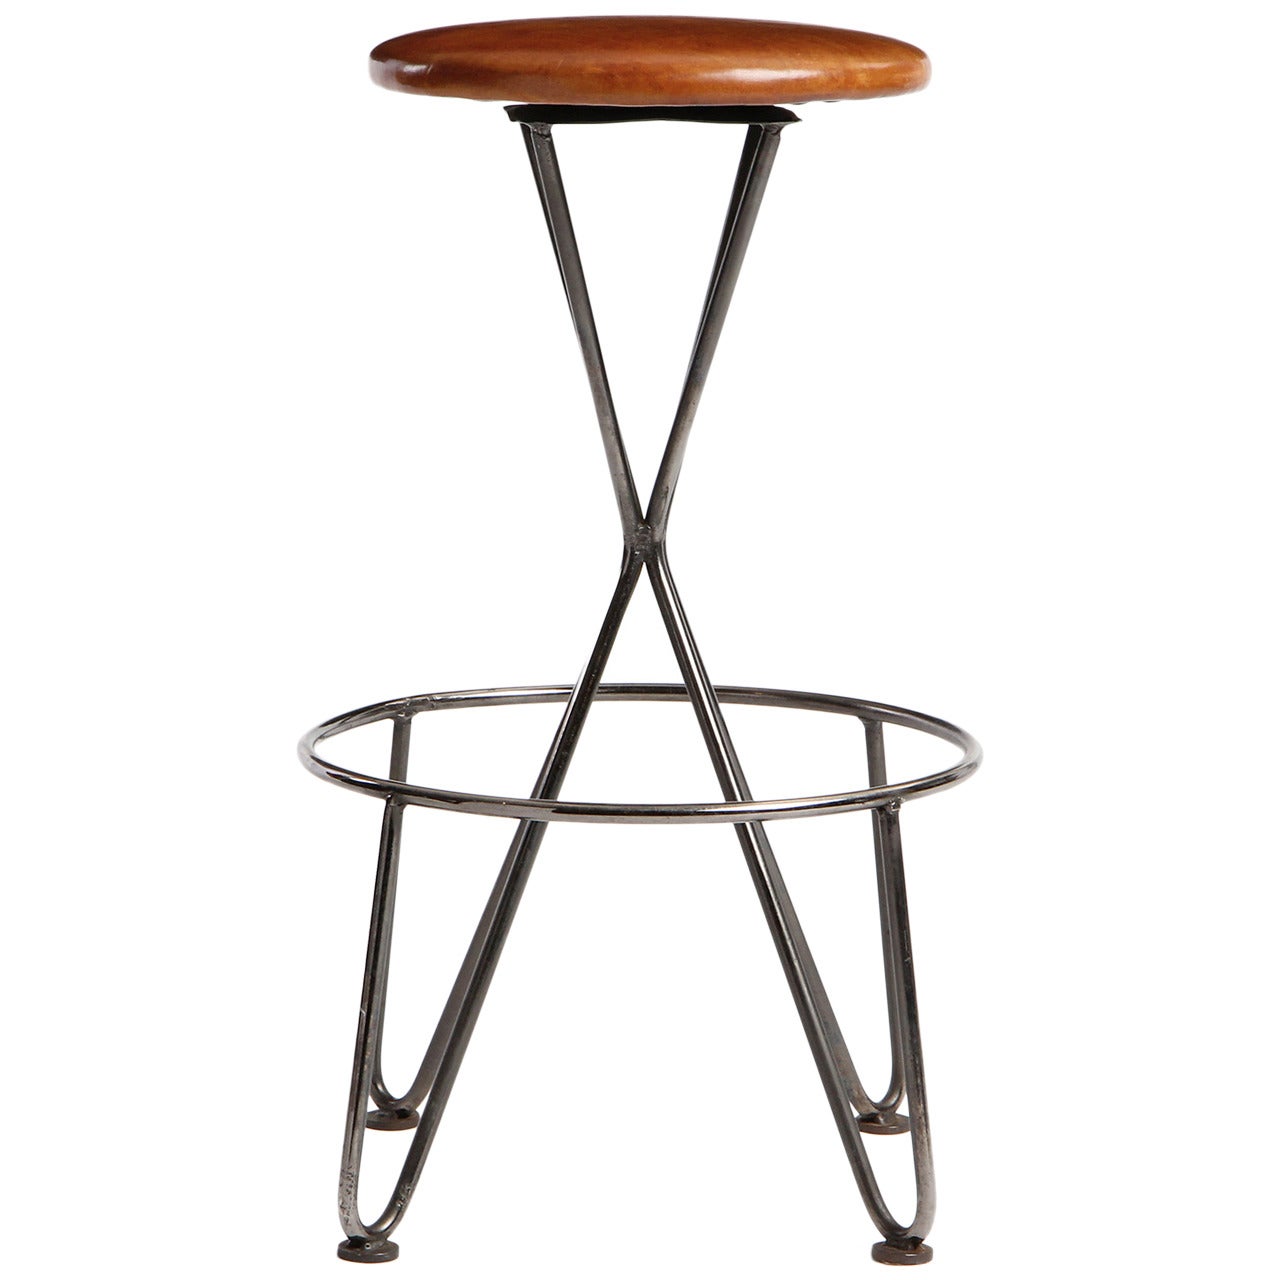 Swiveling Steel and Leather Stool